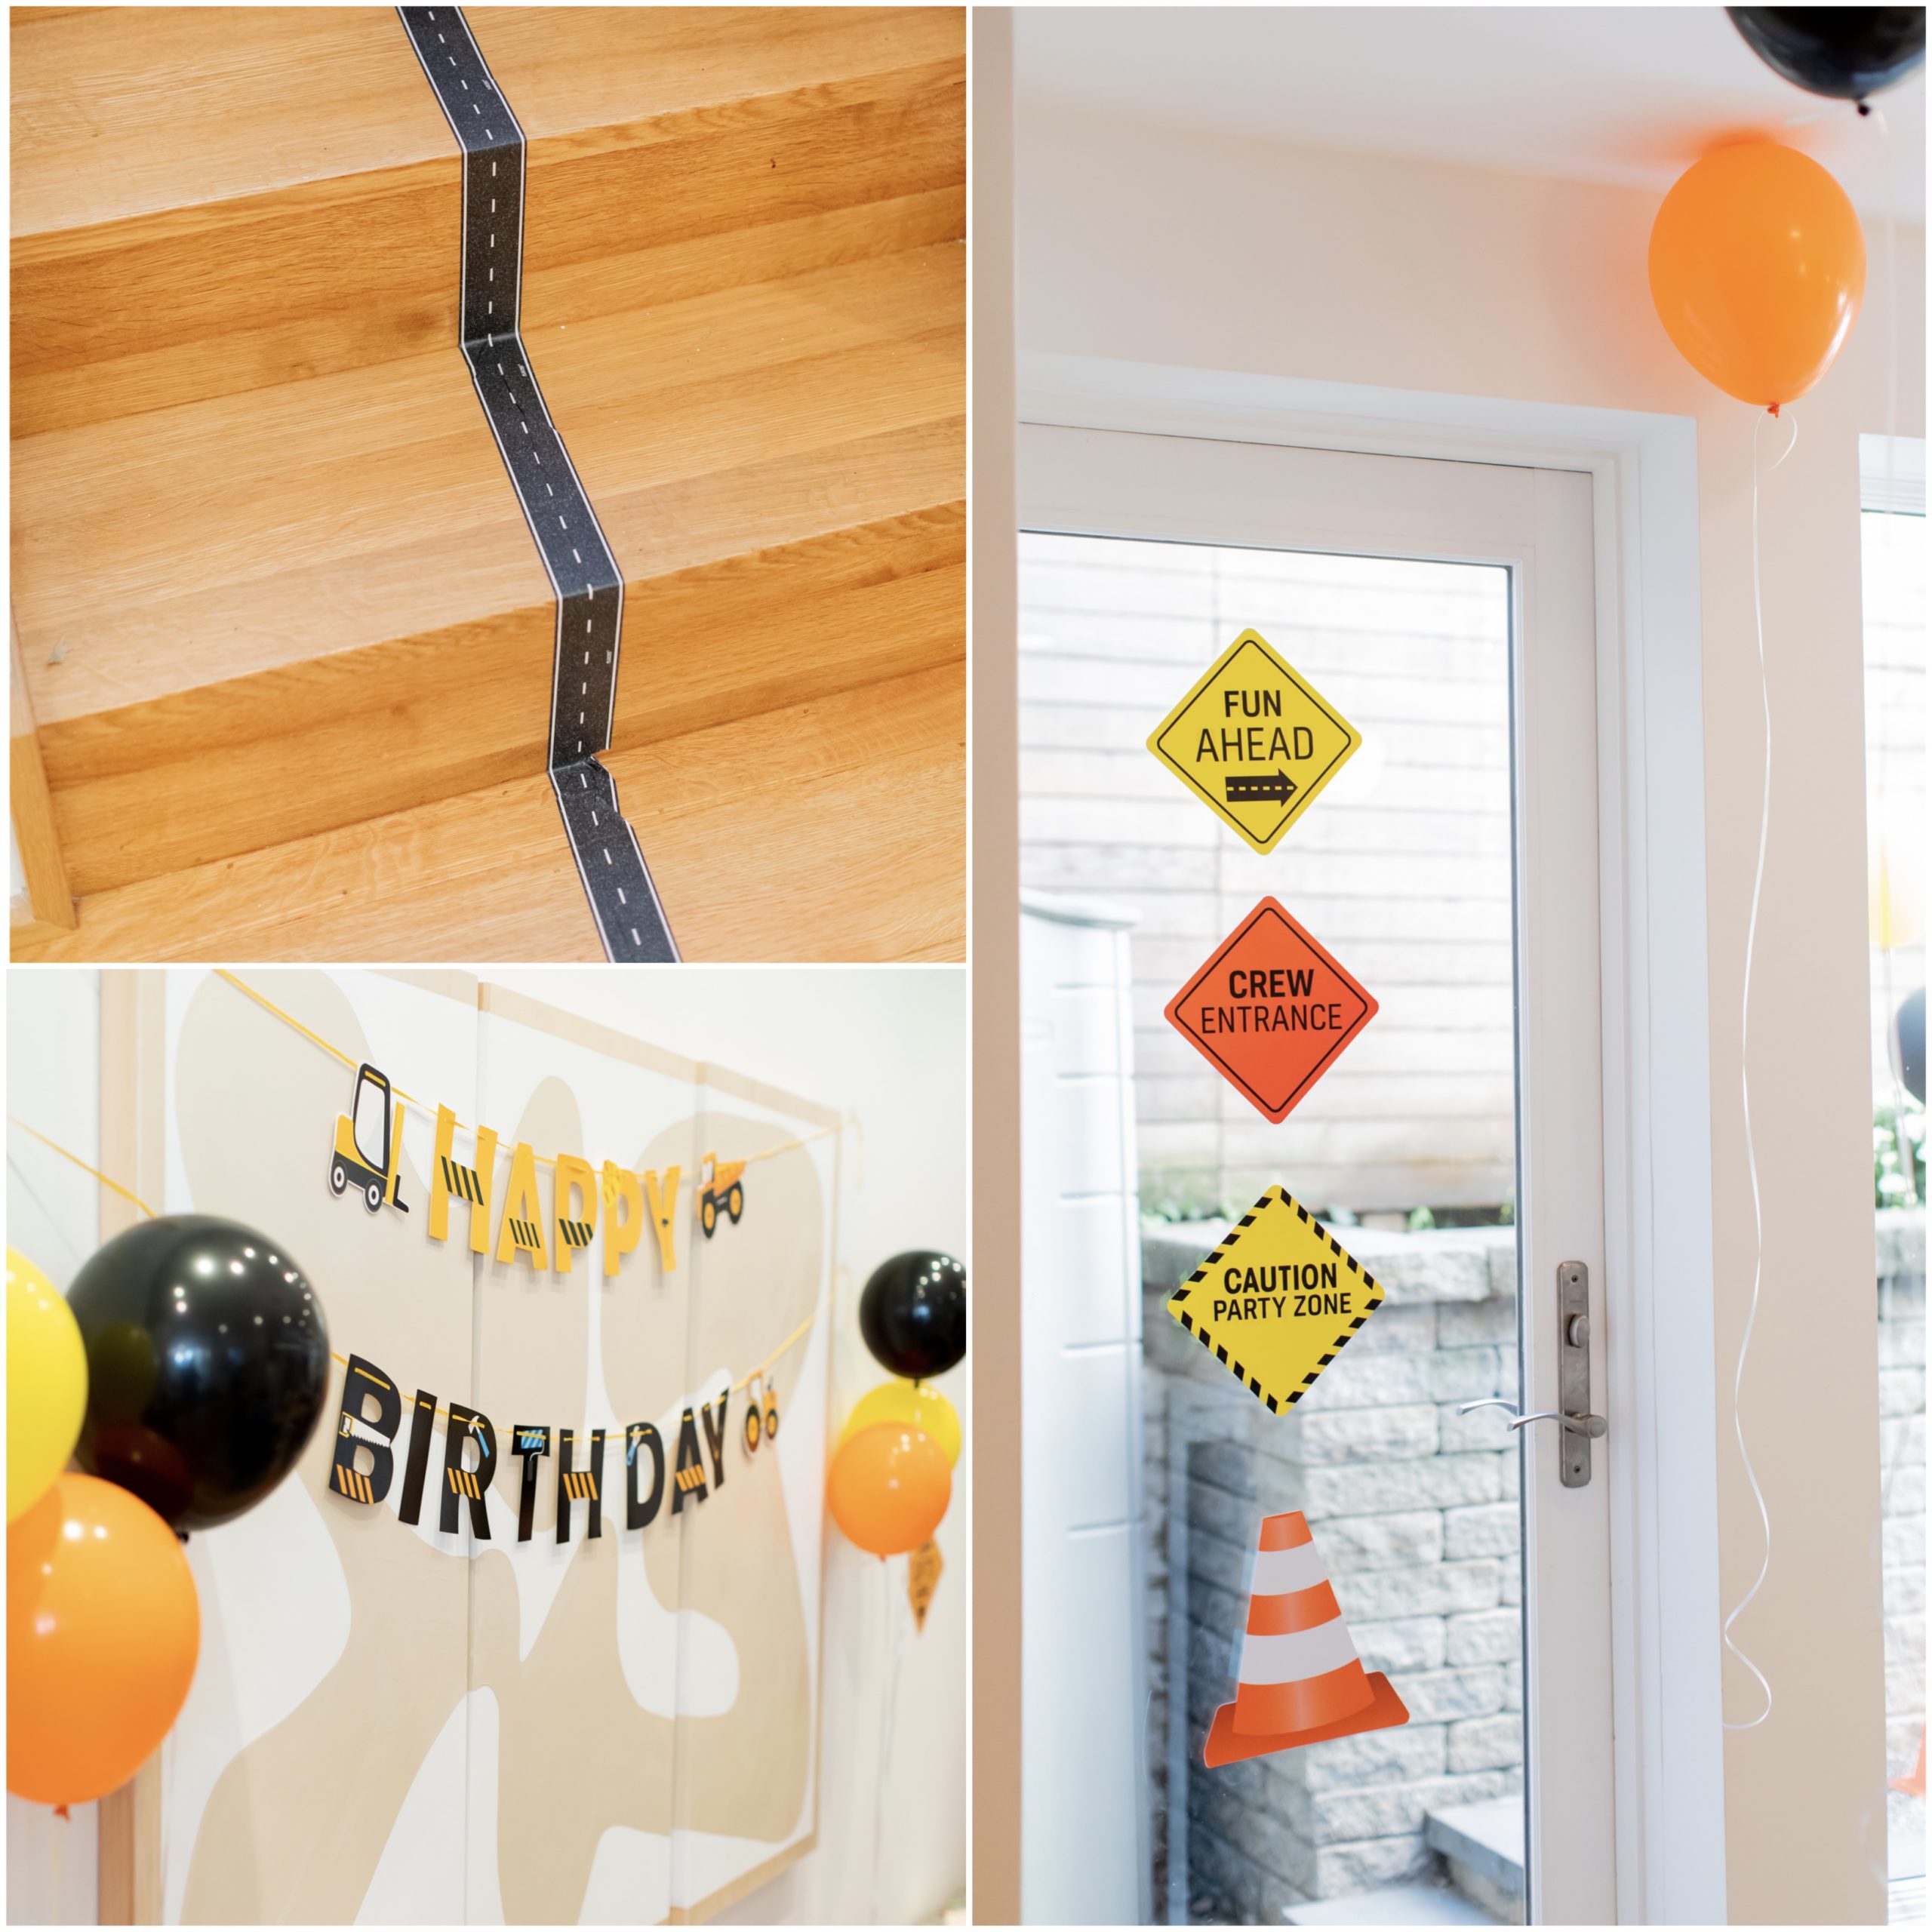 Luca's Construction Themed 3rd Birthday Party